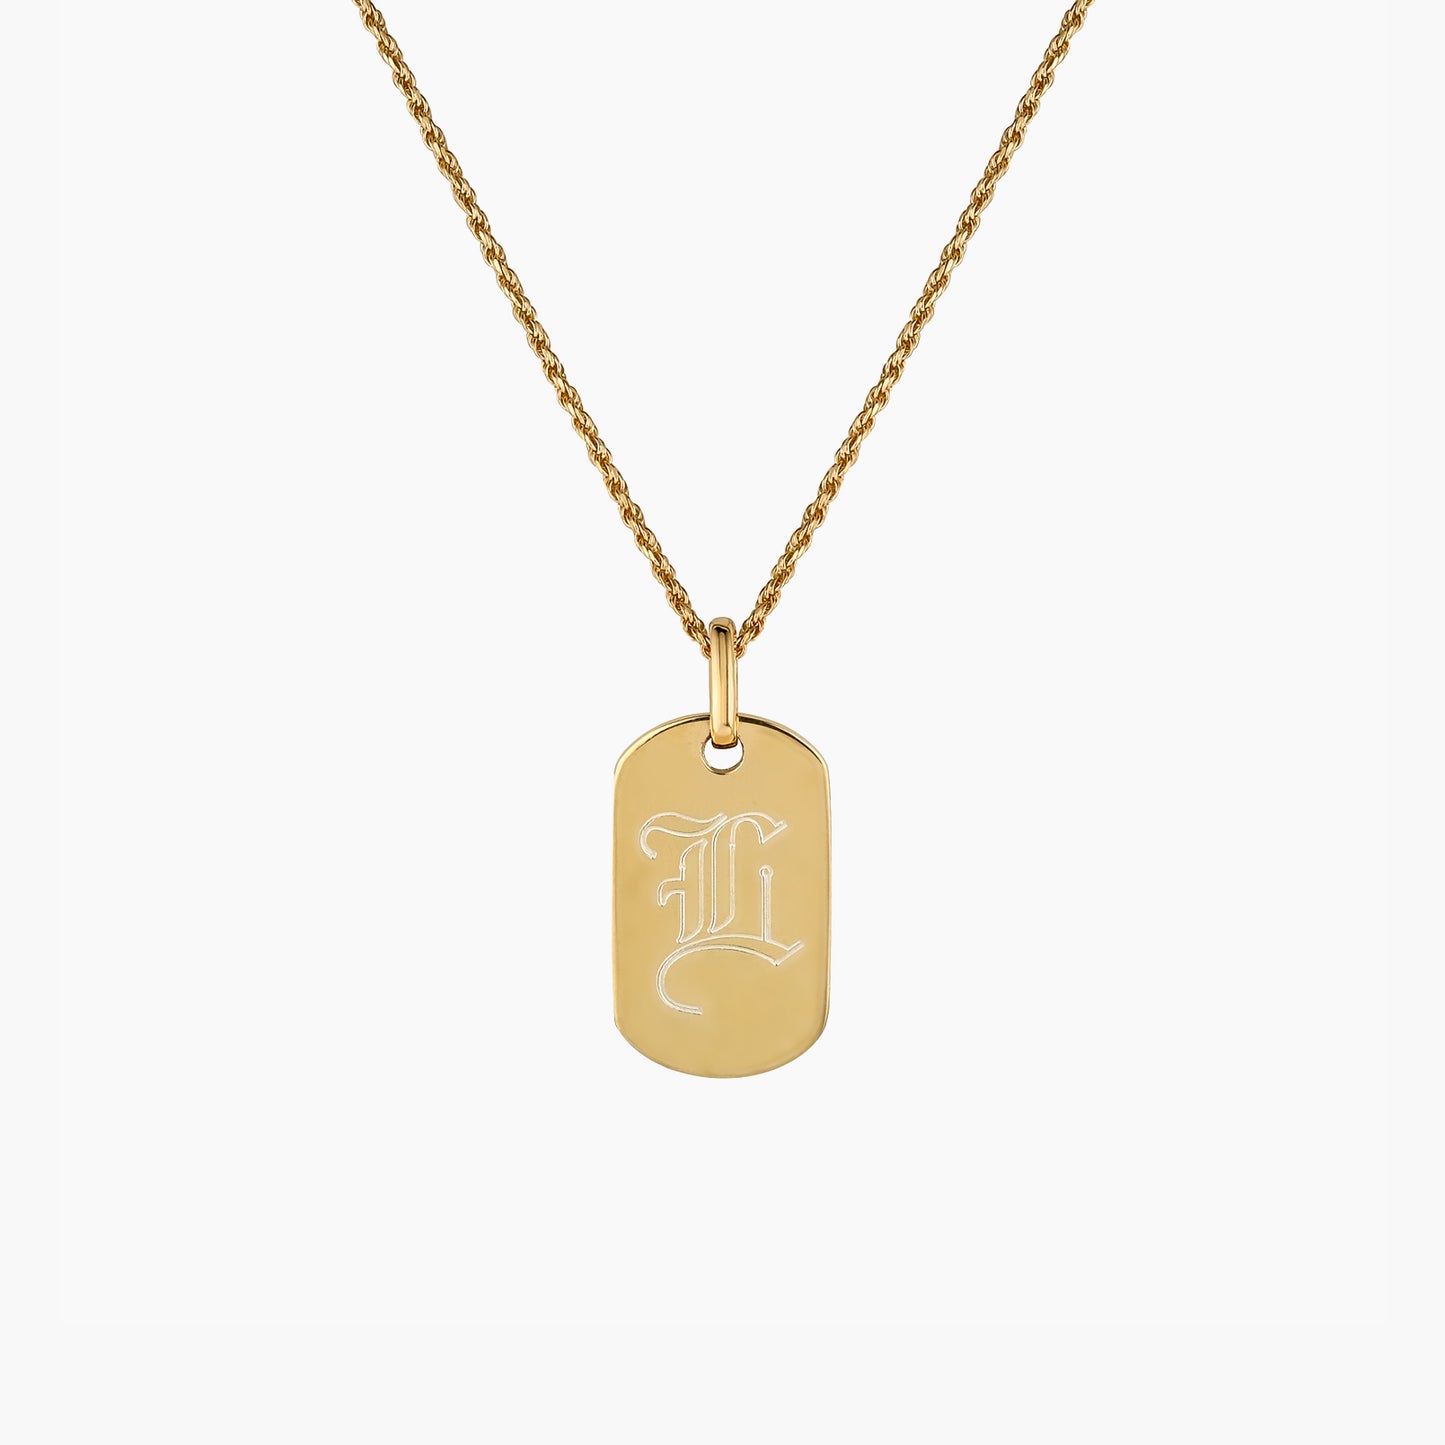 The Rounded Dog Tag